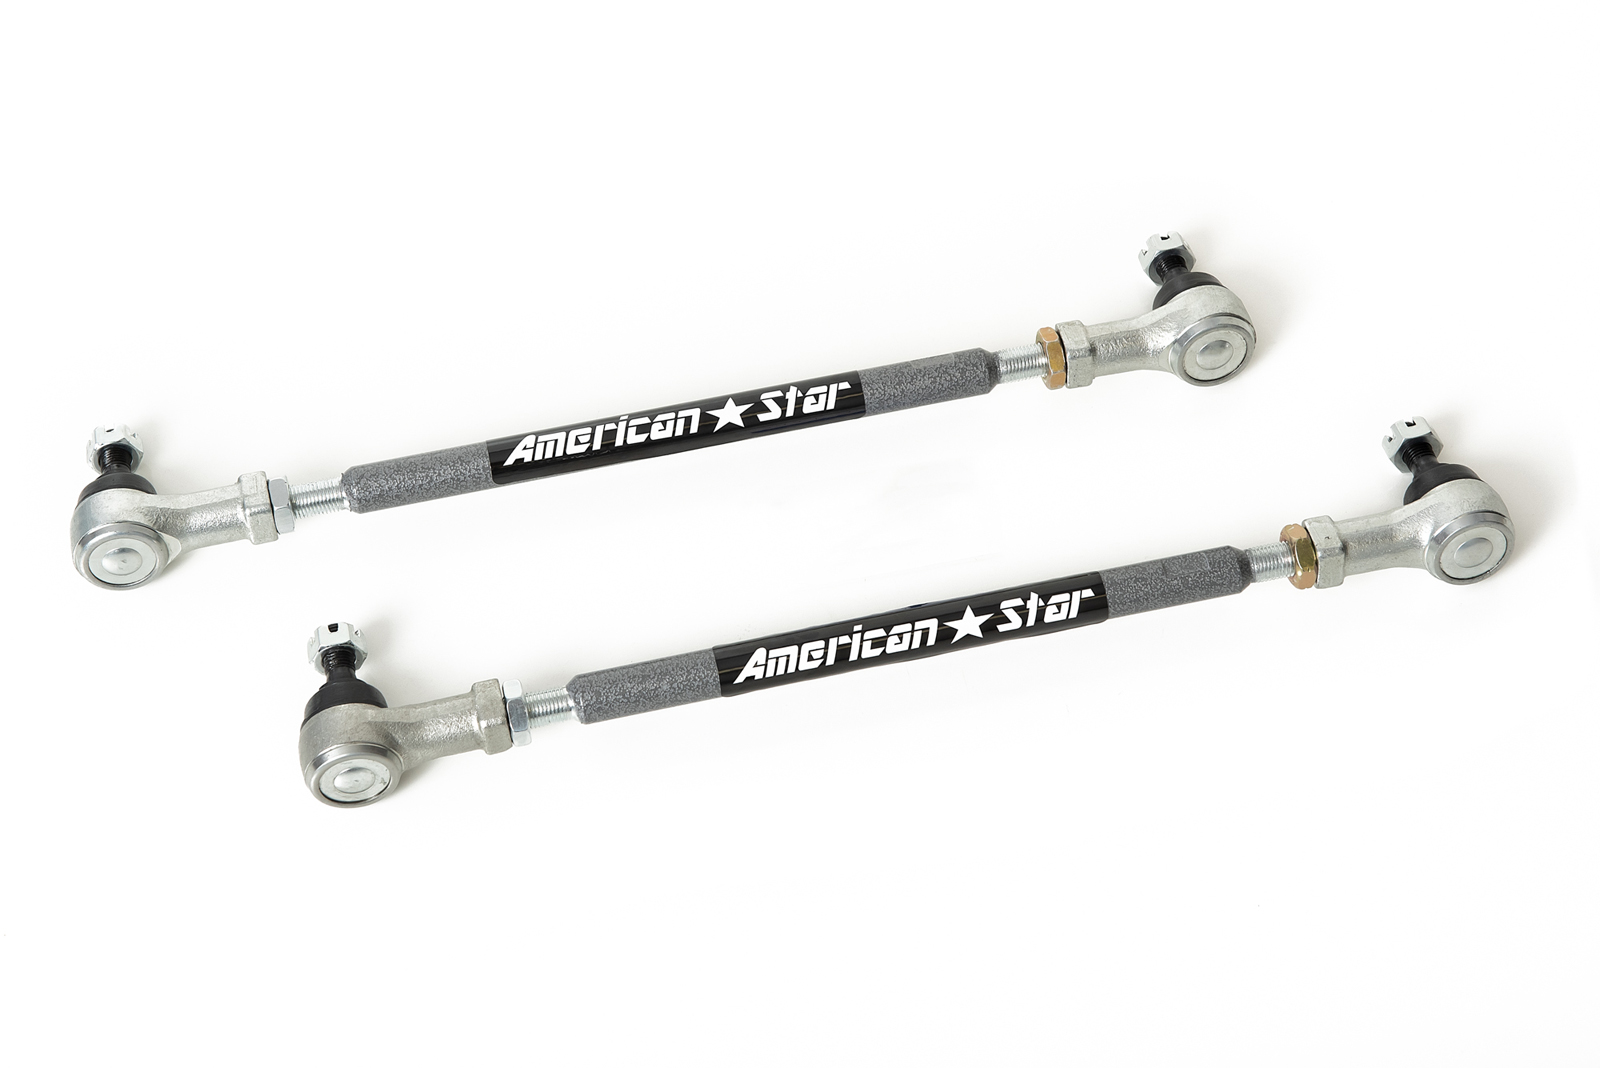 American Star MX Pro Tie Rods and Ends for 1995-2005 Yamaha Wolverine 350 